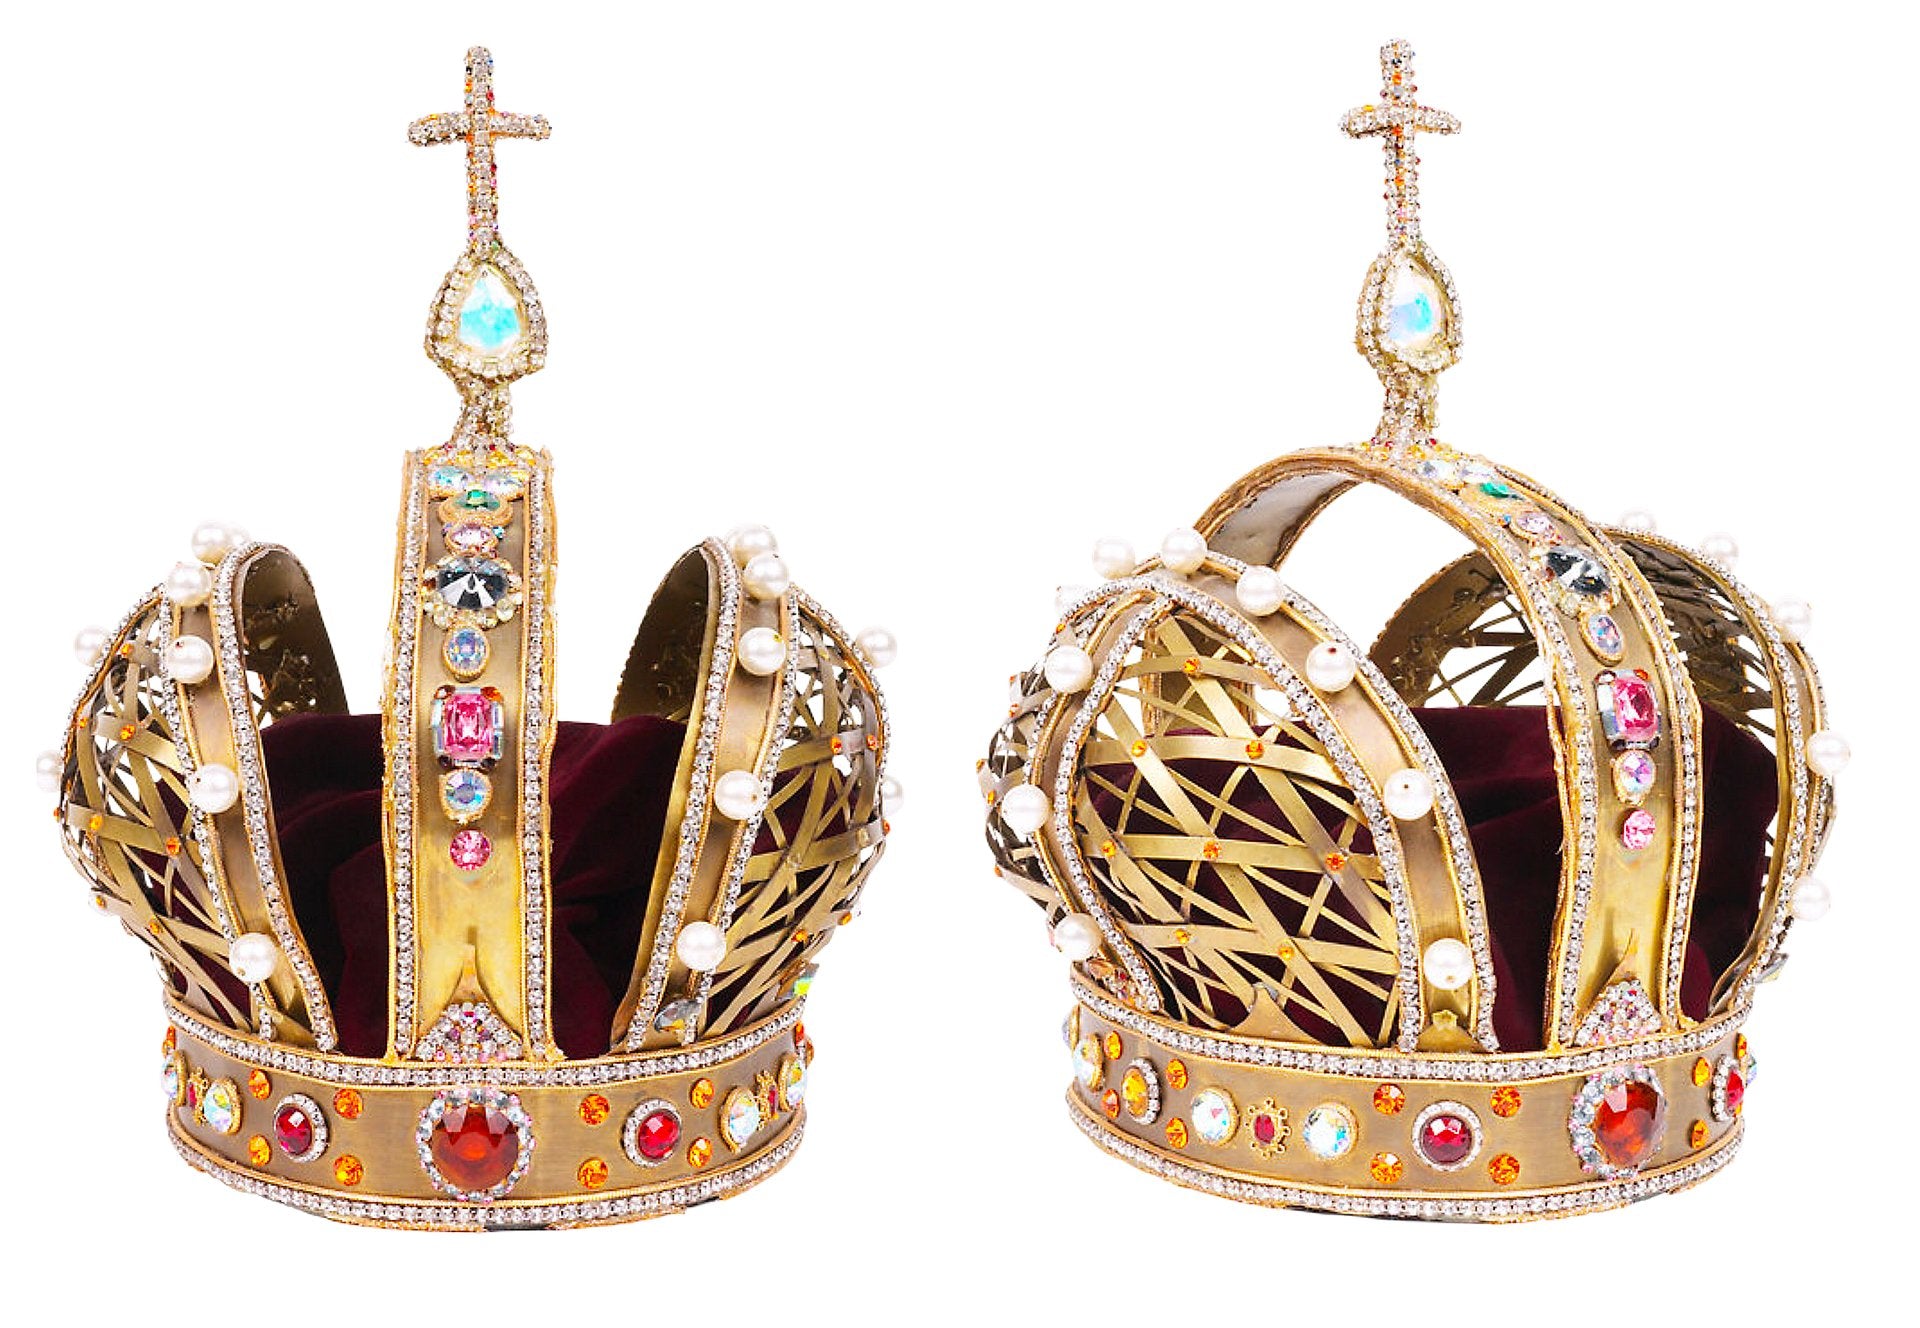 World's Most Valuable Royal Jewelry - DSF Antique Jewelry